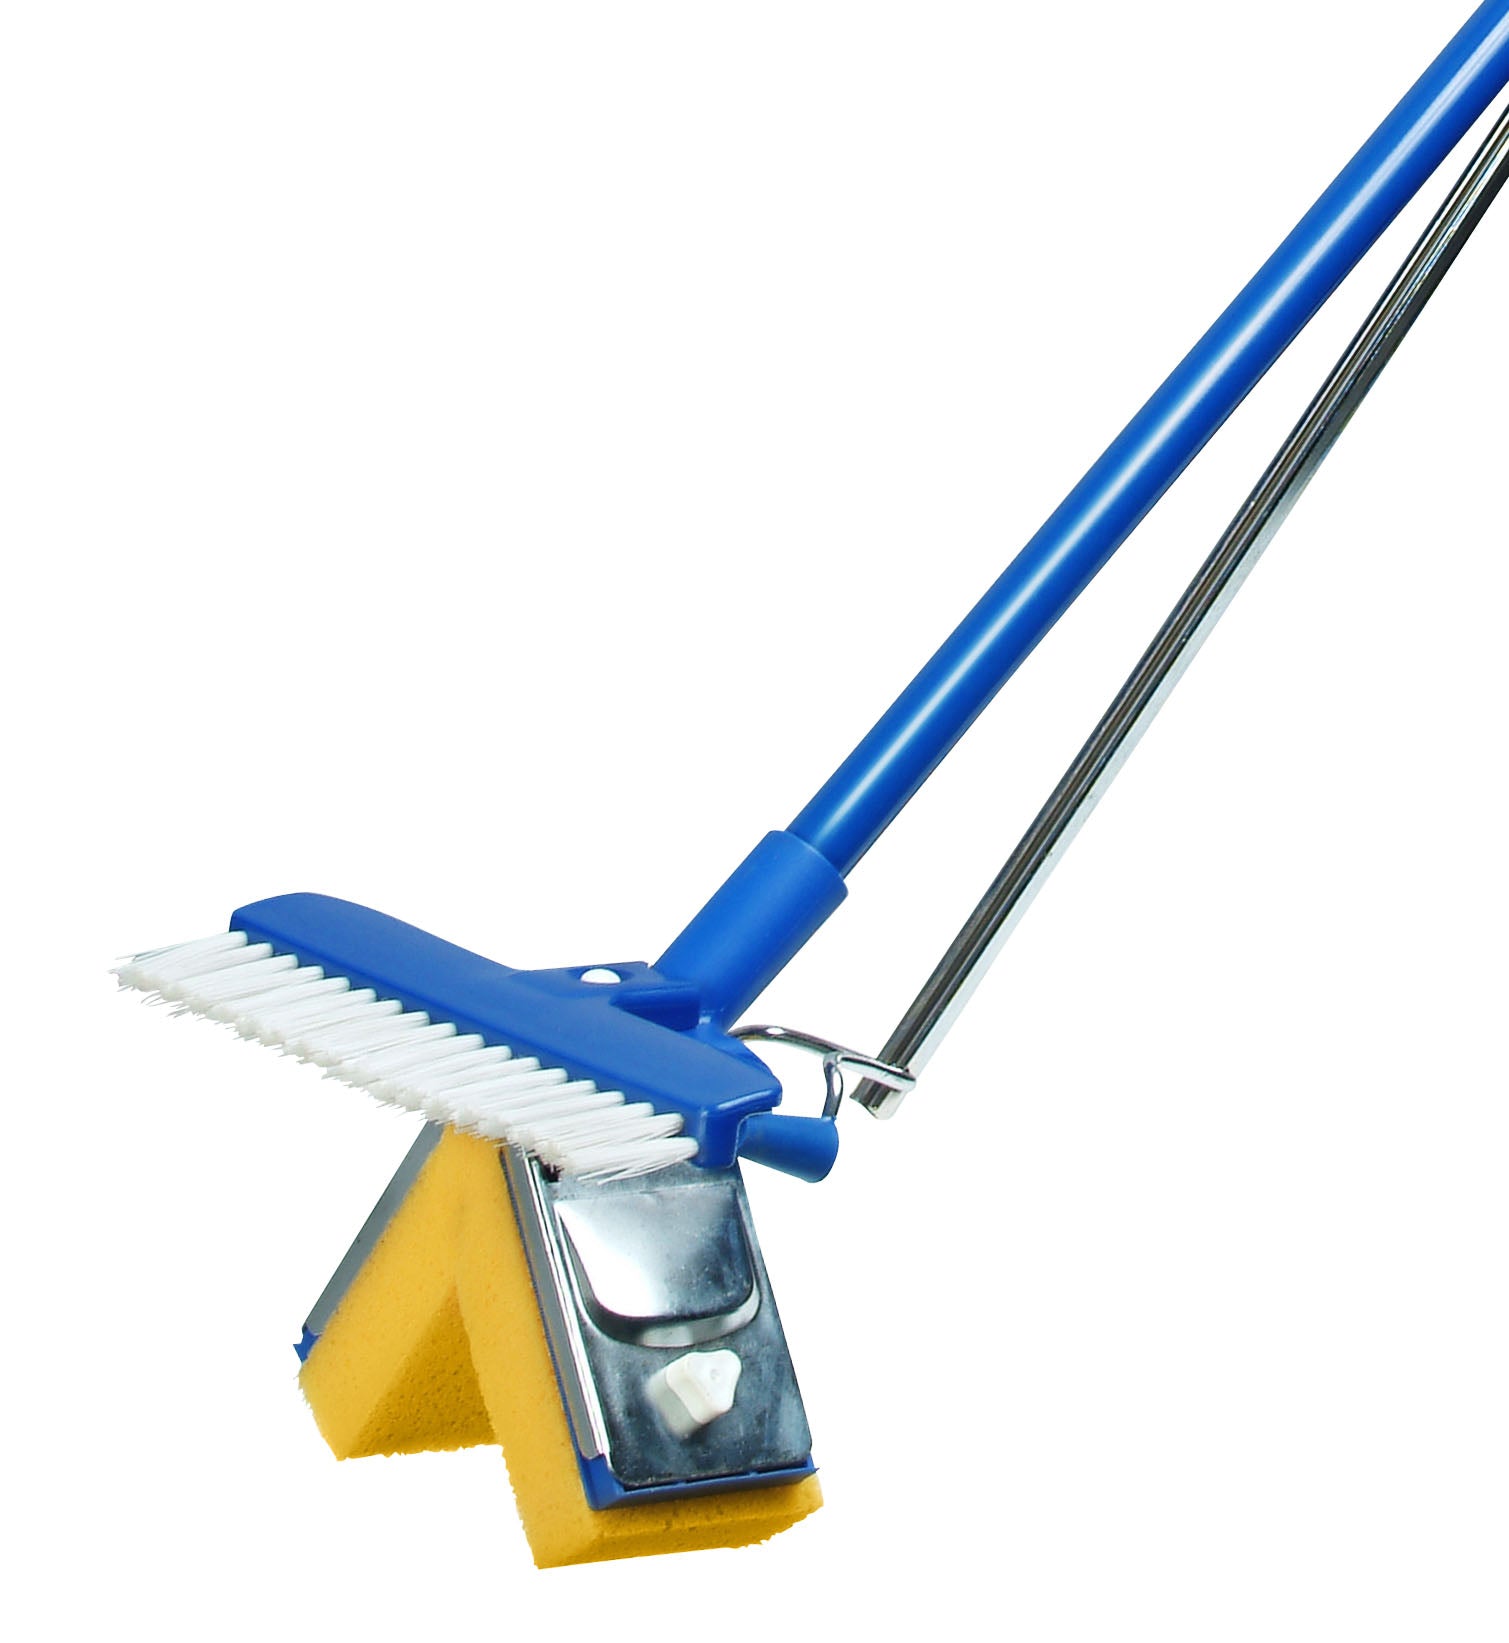 Superio Sponge Mop with Detachable Brush, for Household Use.